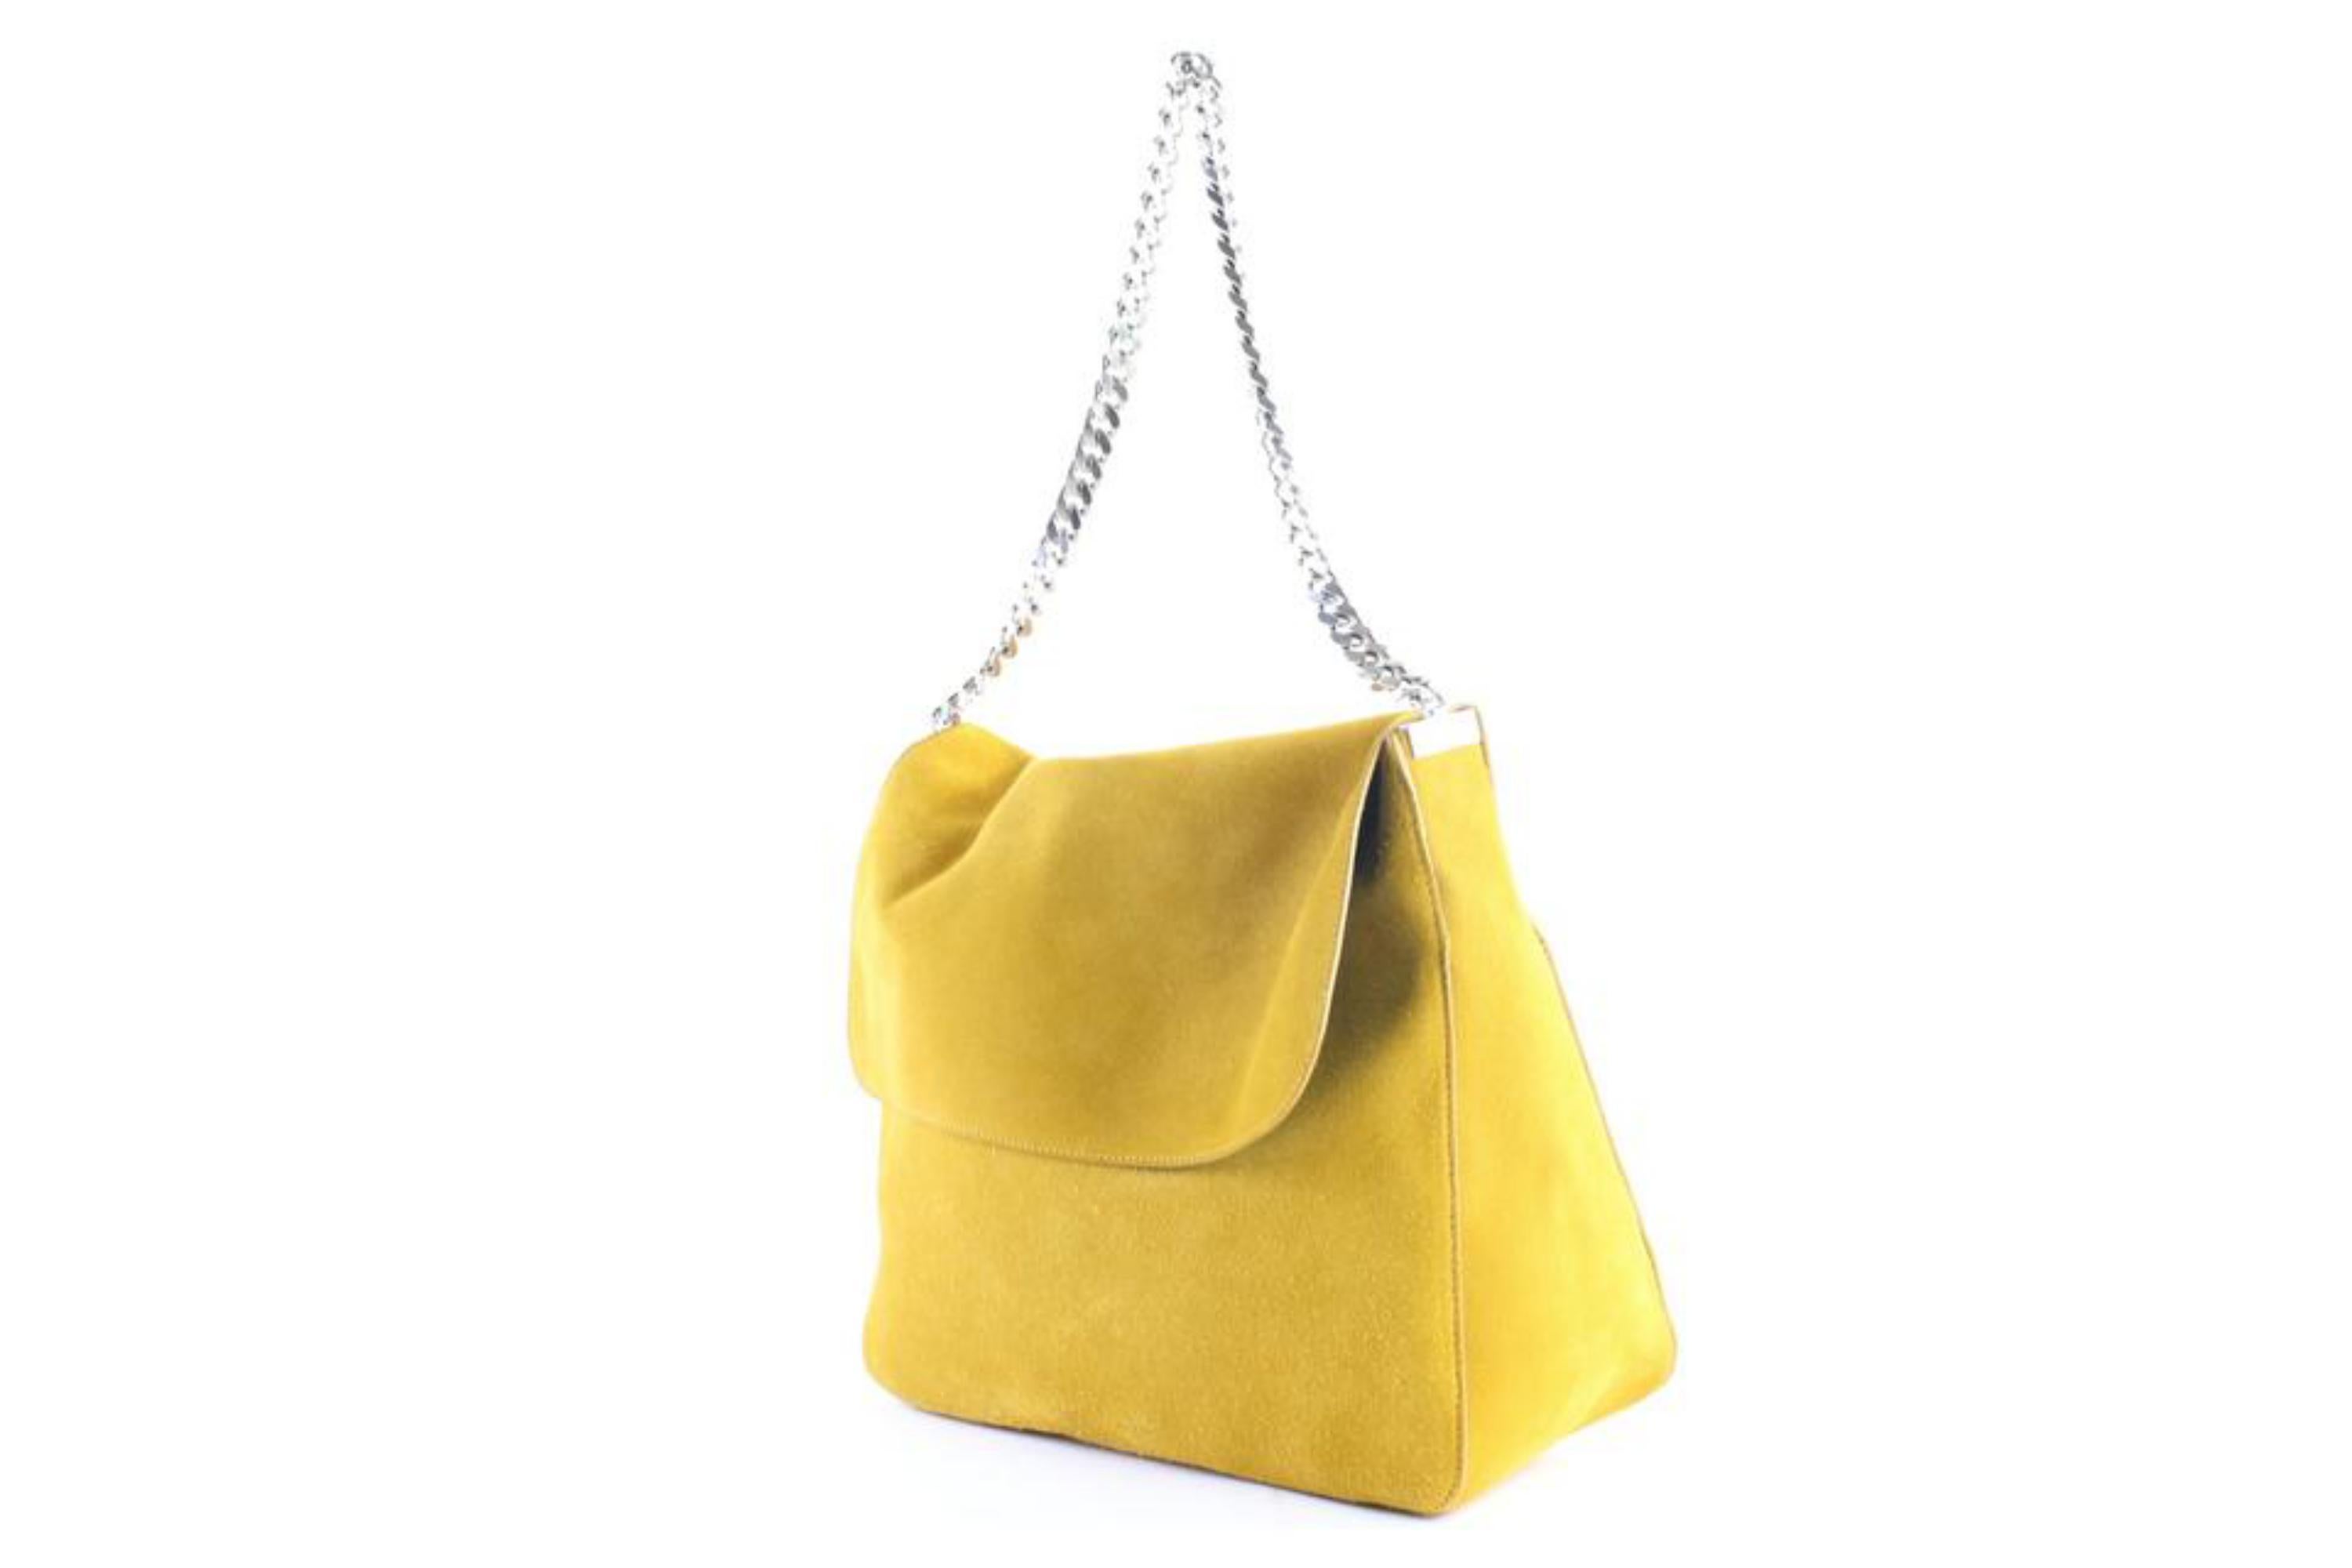 Céline Gourmette Hobo Chain 9cer0613 Mustard Yellow Suede Shoulder Bag For Sale 2